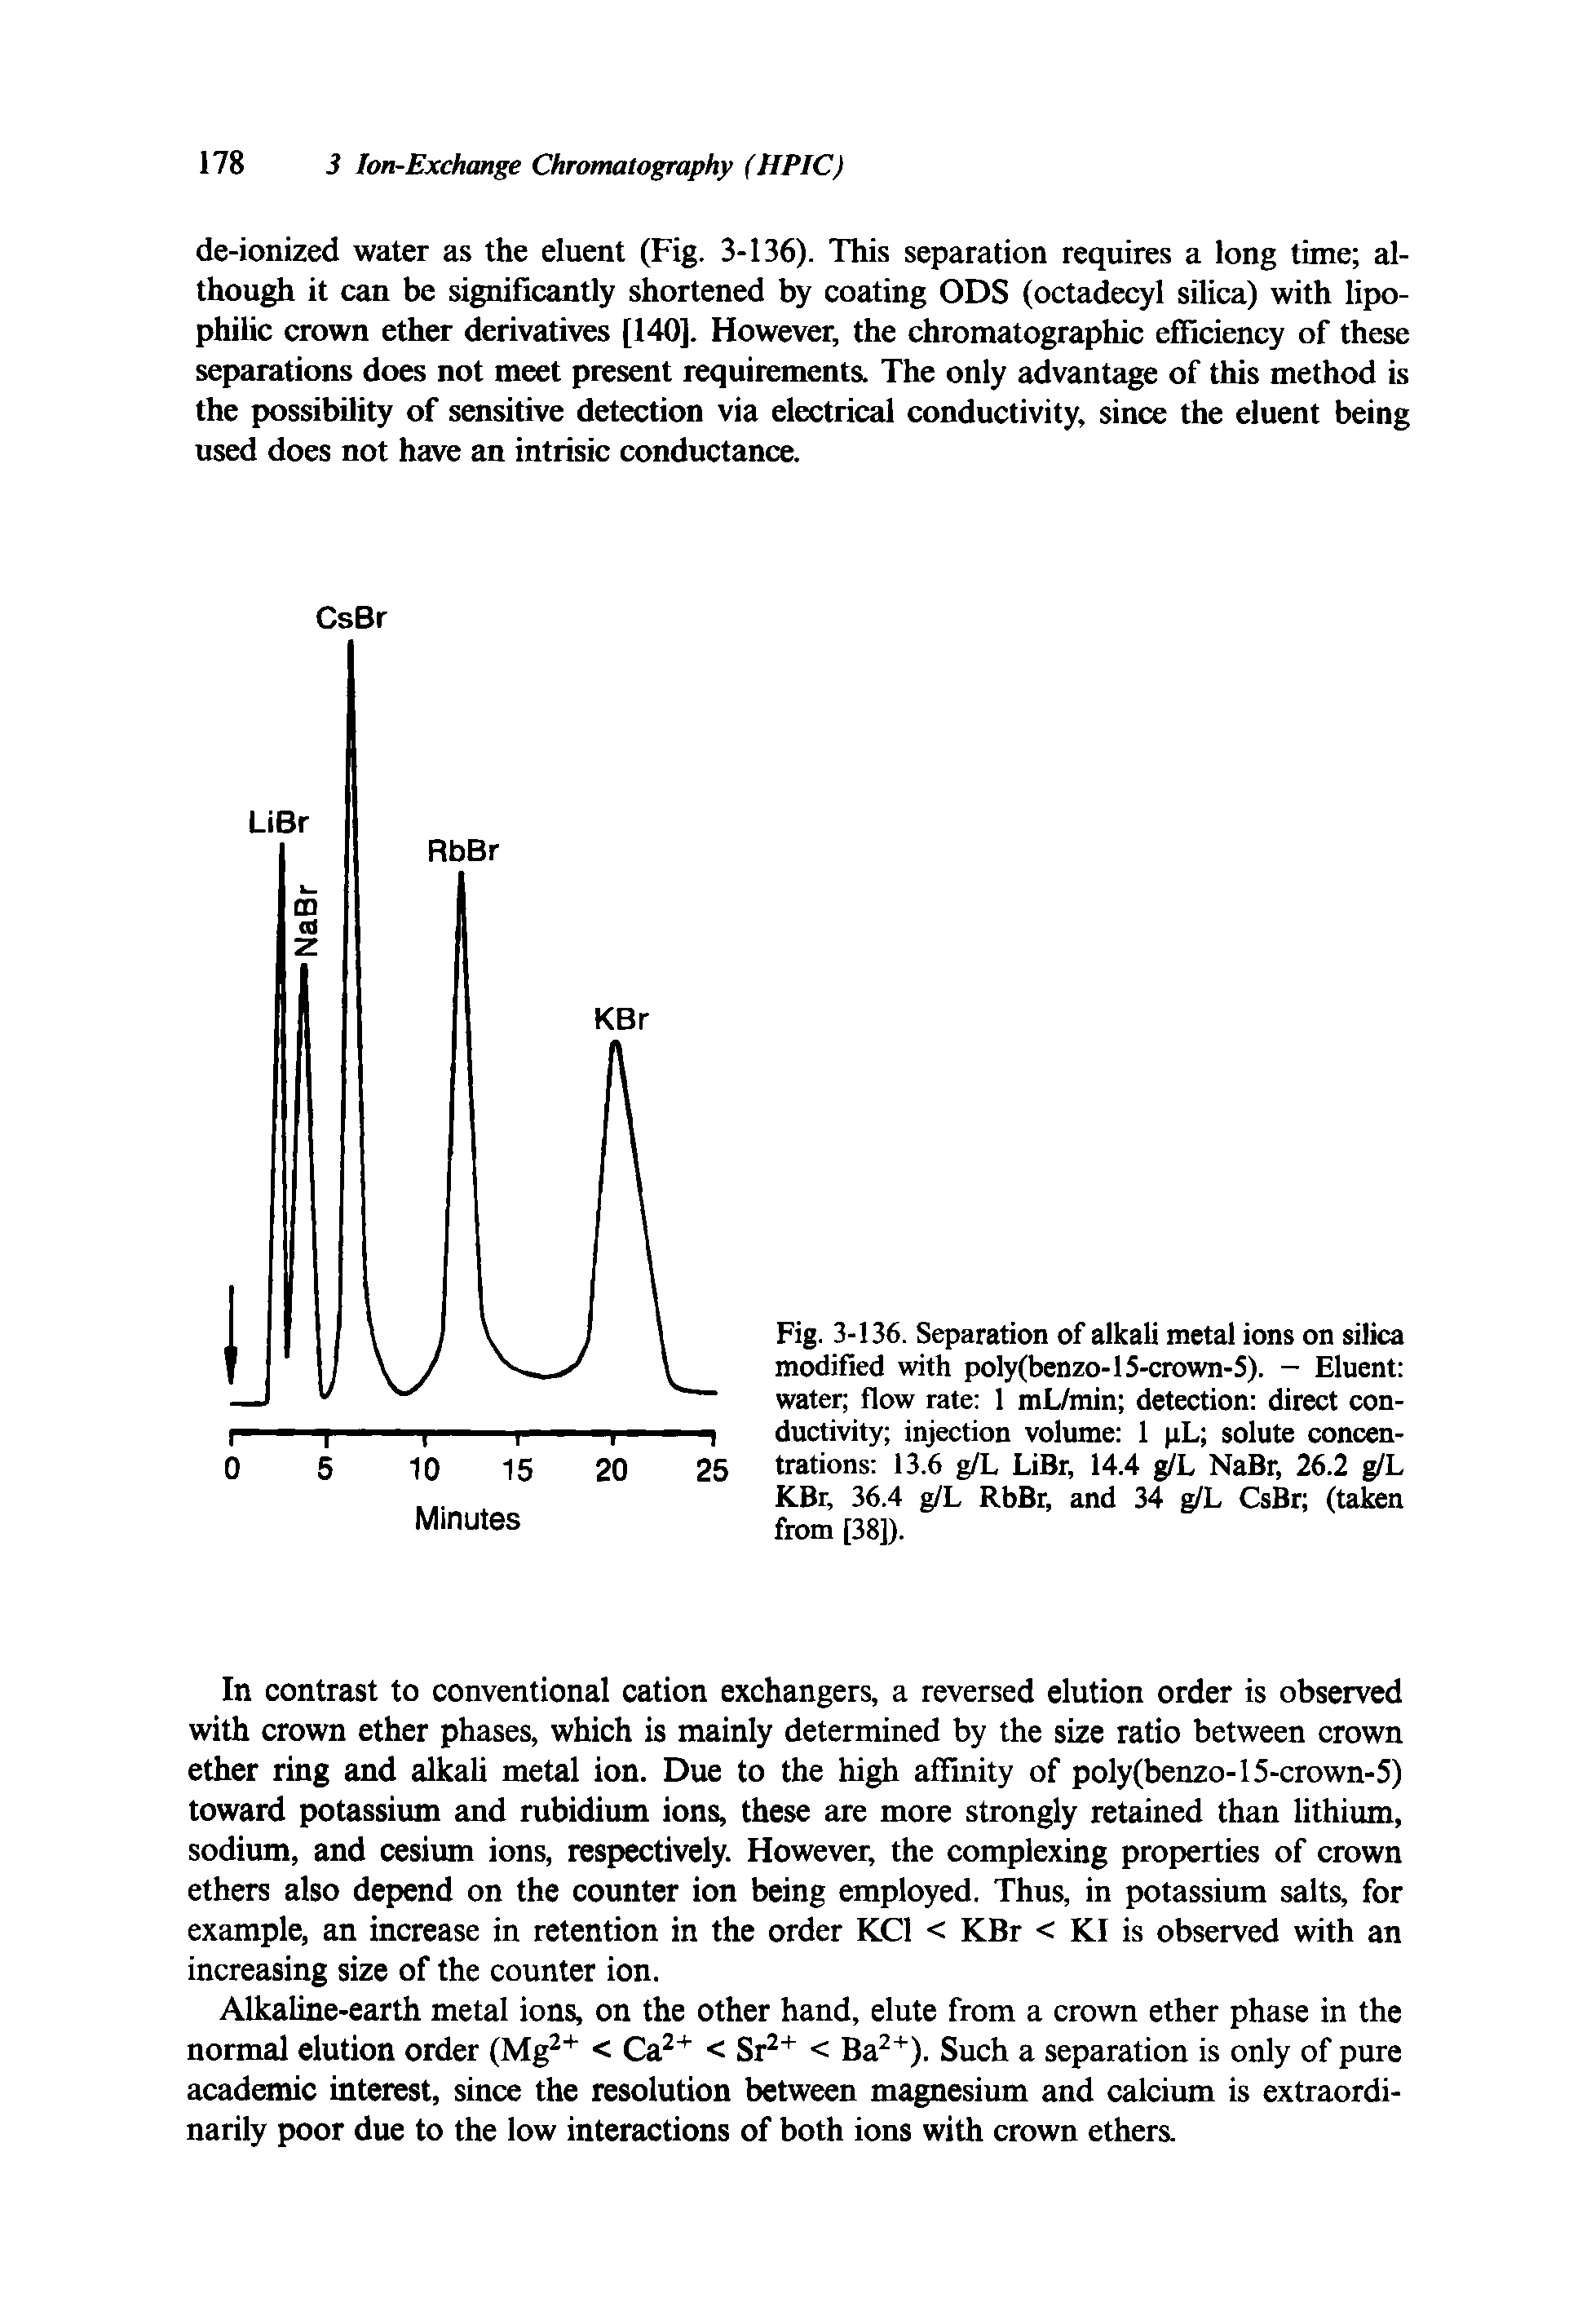 Fig. 3-136. Separation of alkali metal ions on silica modified with poly(benzo-15-crown-5). - Eluent water flow rate 1 mL/min detection direct conductivity injection volume 1 pL solute concentrations 13.6 g/L LiBr, 14.4 g/L NaBr, 26.2 g/L KBr, 36.4 g/L RbBr, and 34 g/L CsBr (taken from [38]).